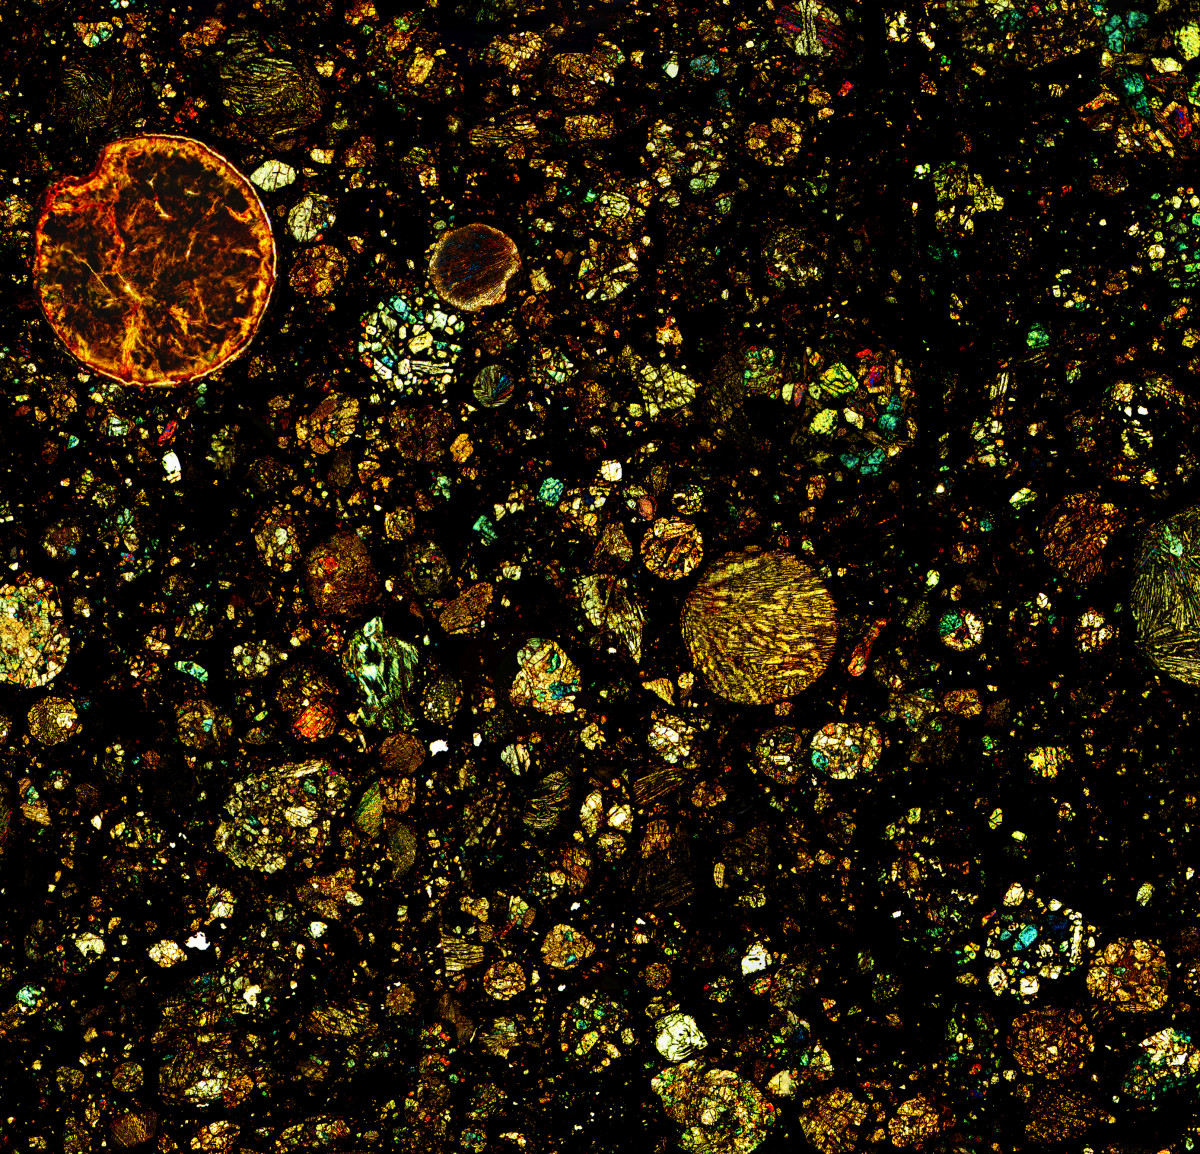 What Are Chondrules and Chondrites?